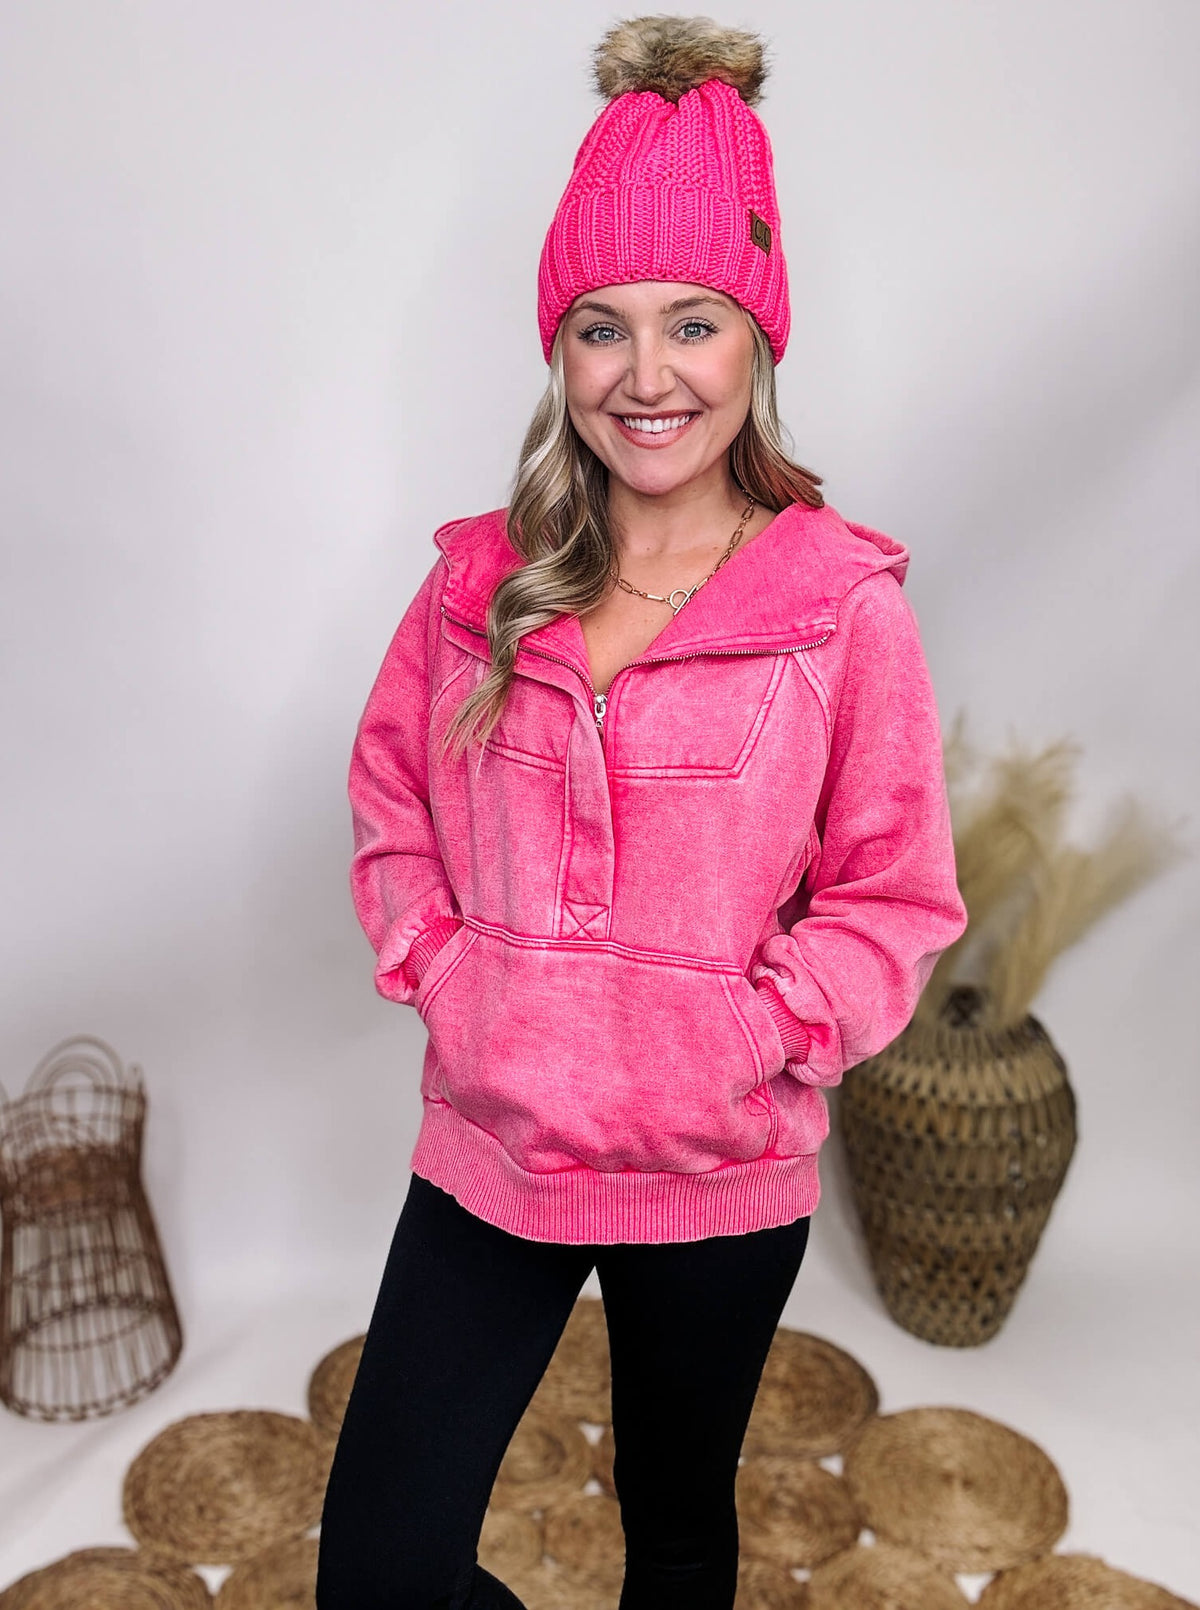 Zenana Fuchsia Pink Acid Washed 1/4 Zip Closure Fleece Lined Hoodie Pullover Kangaroo Pocket Ribbed Cuff and Hem Details Oversized Fit 58% Cotton, 37% Polyester, 5% Spandex